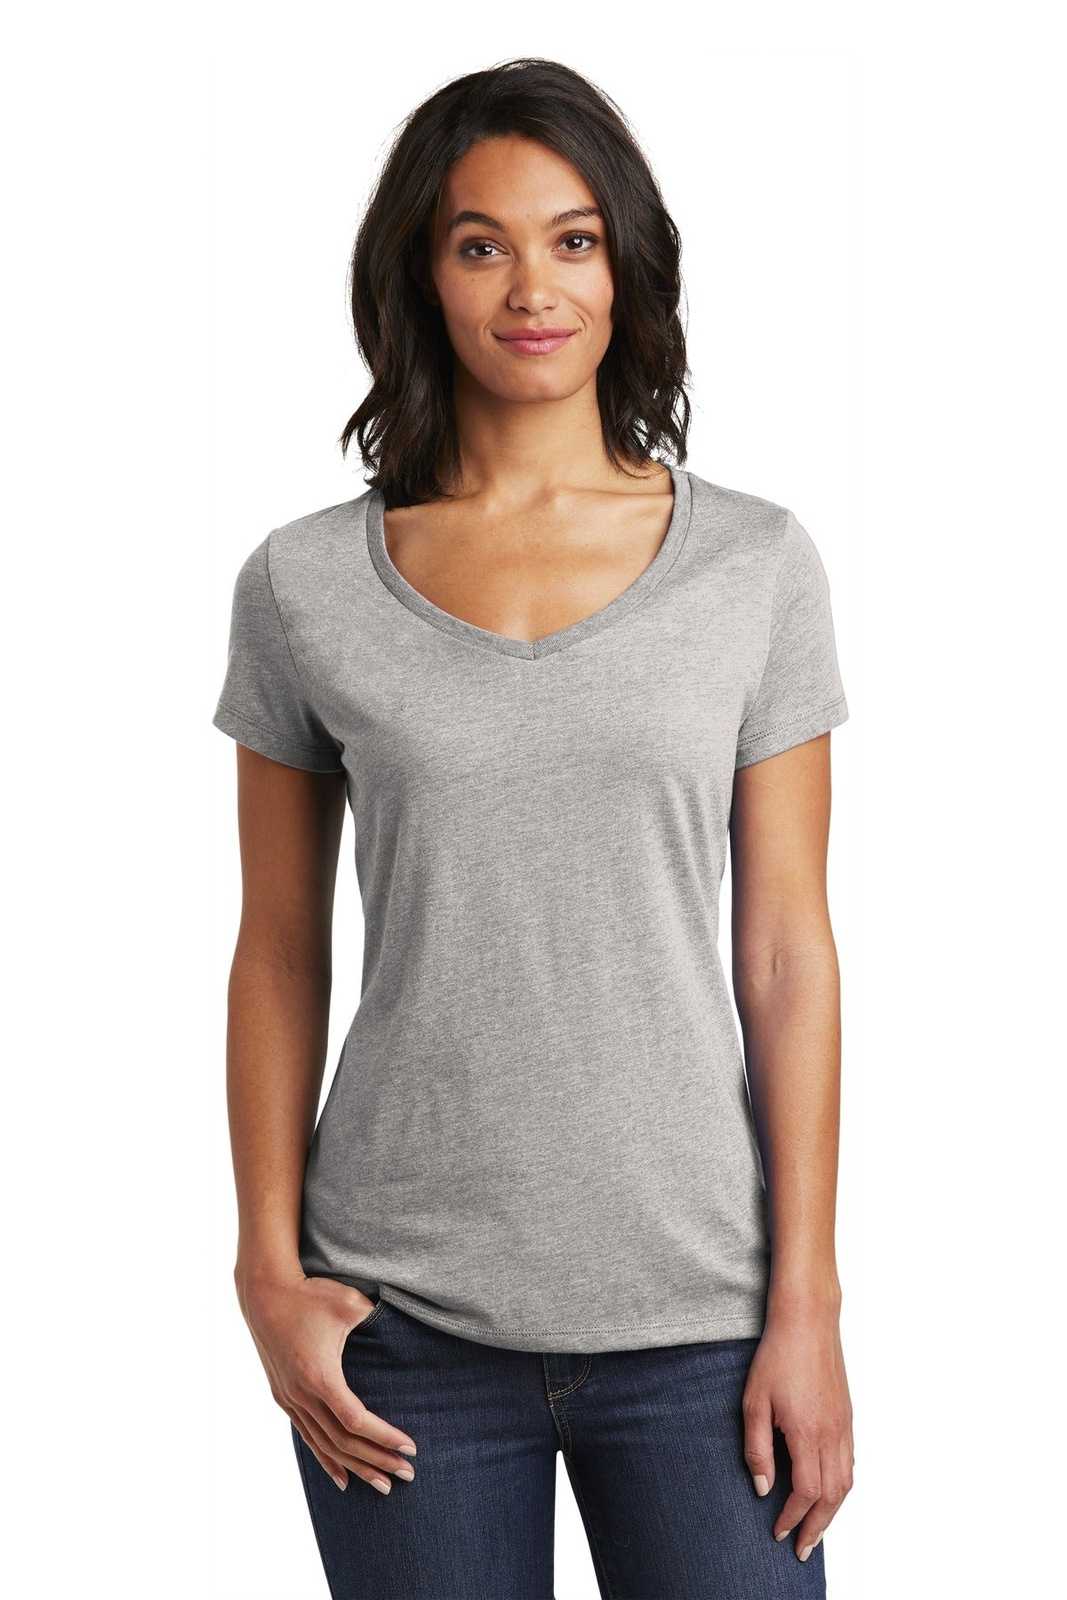 District DT6503 Women's Very Important Tee V-Neck - Light Heather Gray - HIT a Double - 1